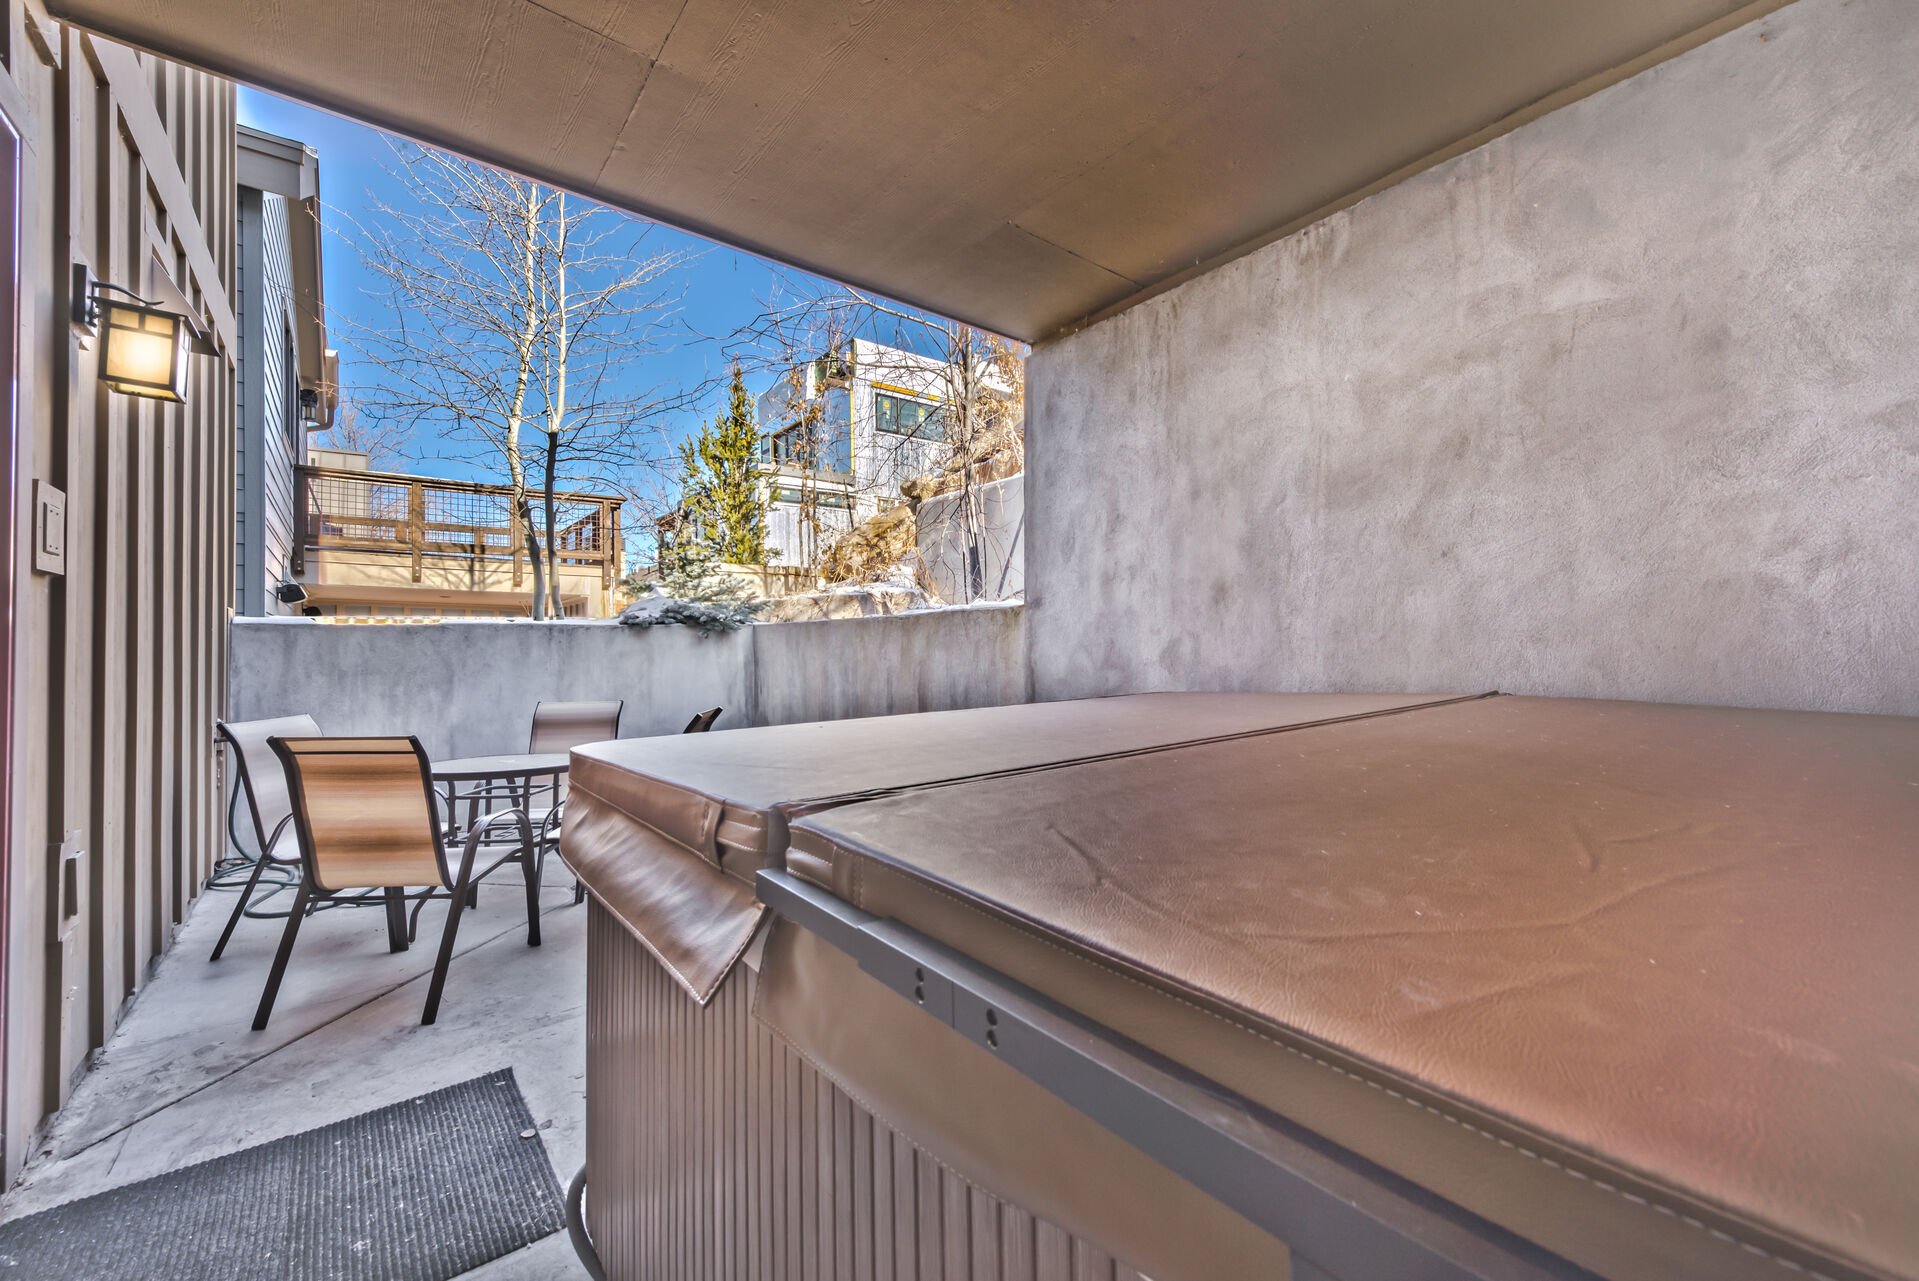 Private Deck off the Kitchen with a 6-Person Hot Tub,   Patio Seating, and a new BBQ Grill